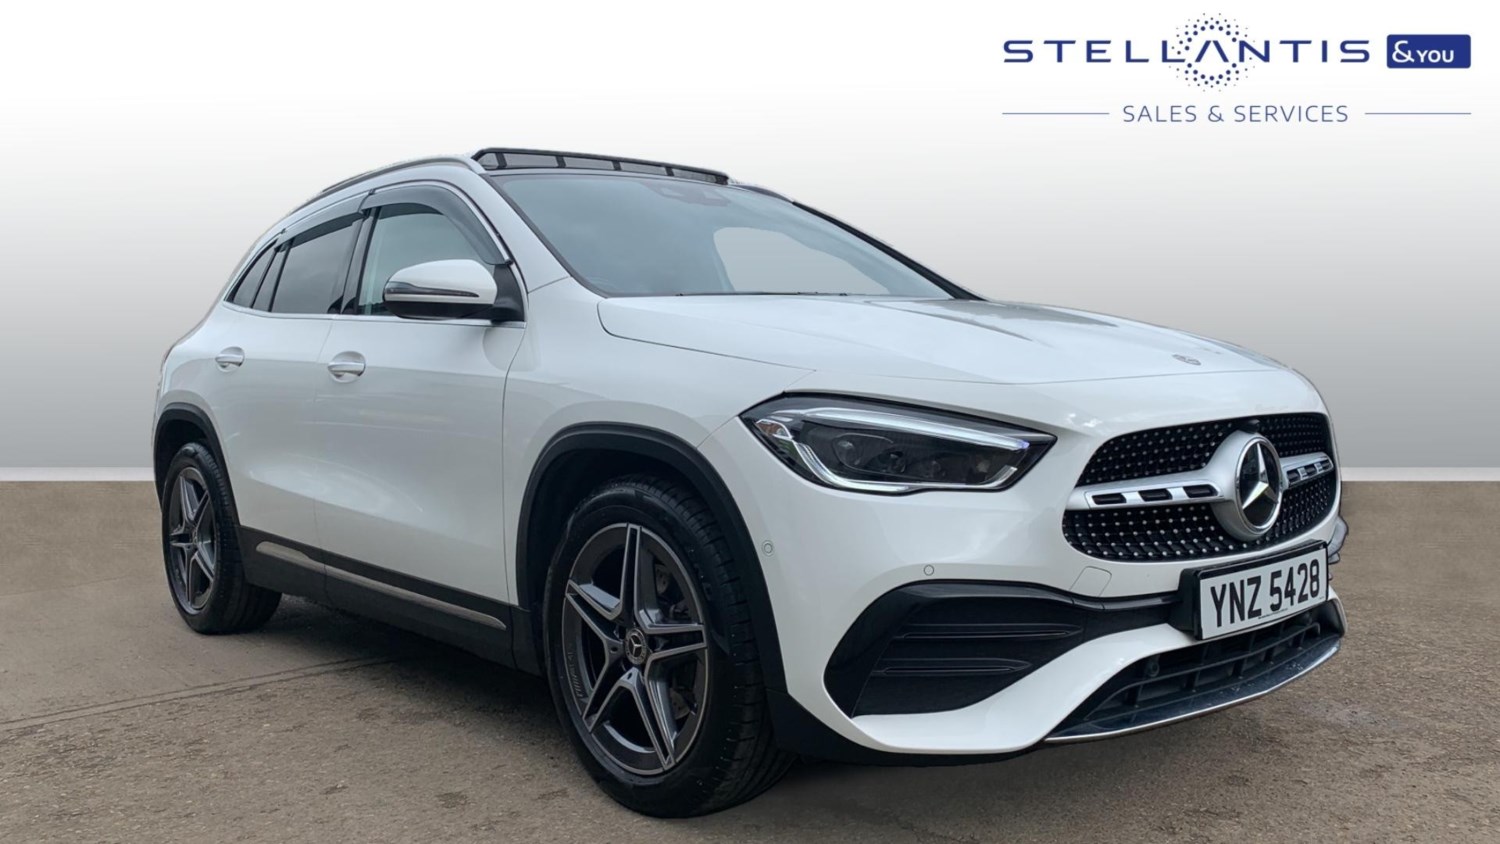 2021 used Mercedes-Benz GLA Class 1.3 GLA180 AMG Line (Premium Plus) 7G-DCT Euro 6 (s/s) 5dr